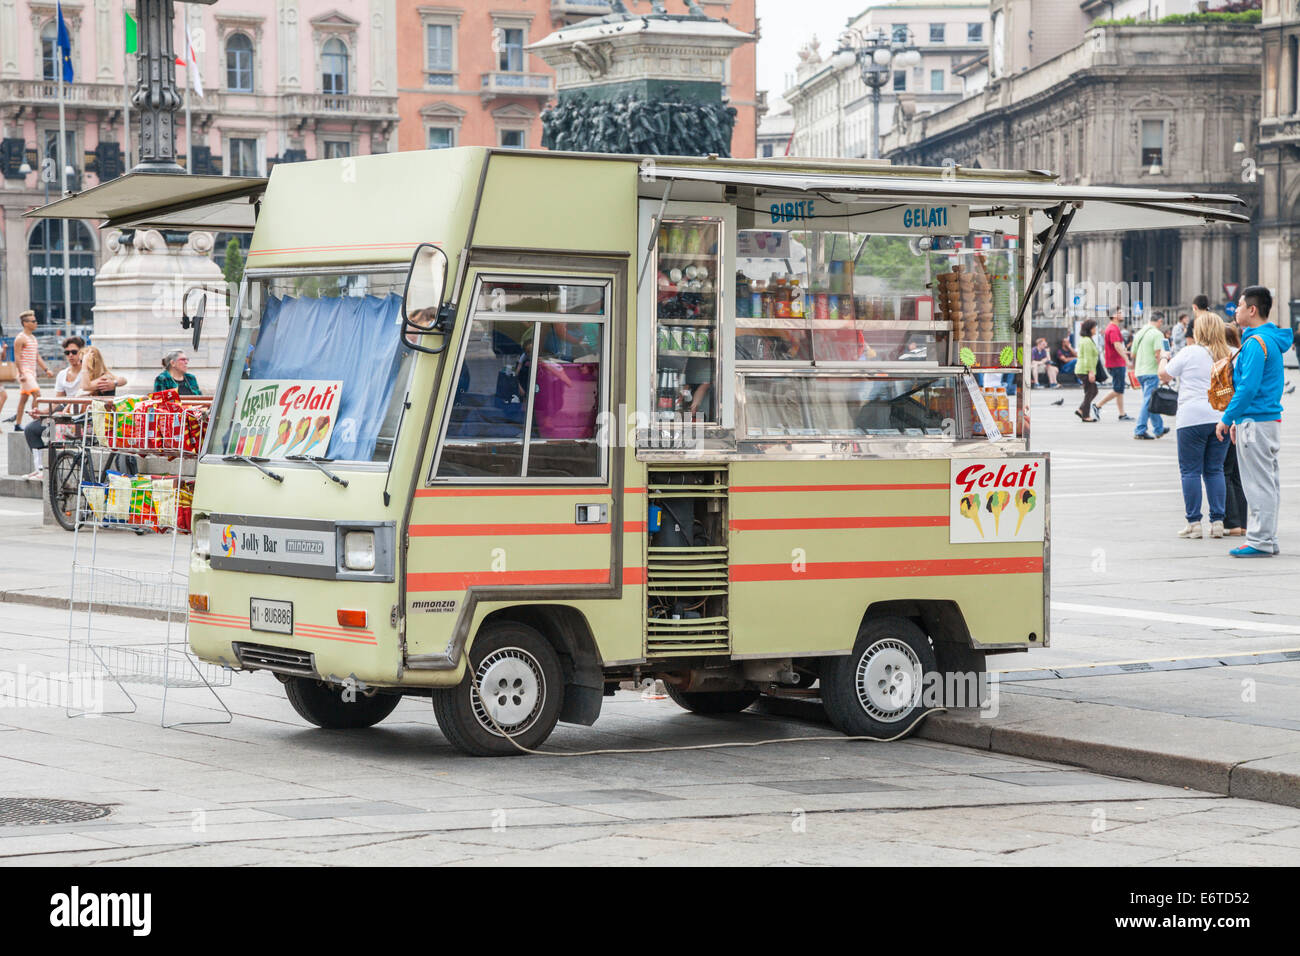 Traditional vintage Italian ice cream and snack van in Piazza Duomo, Milan, Italy Stock Photo